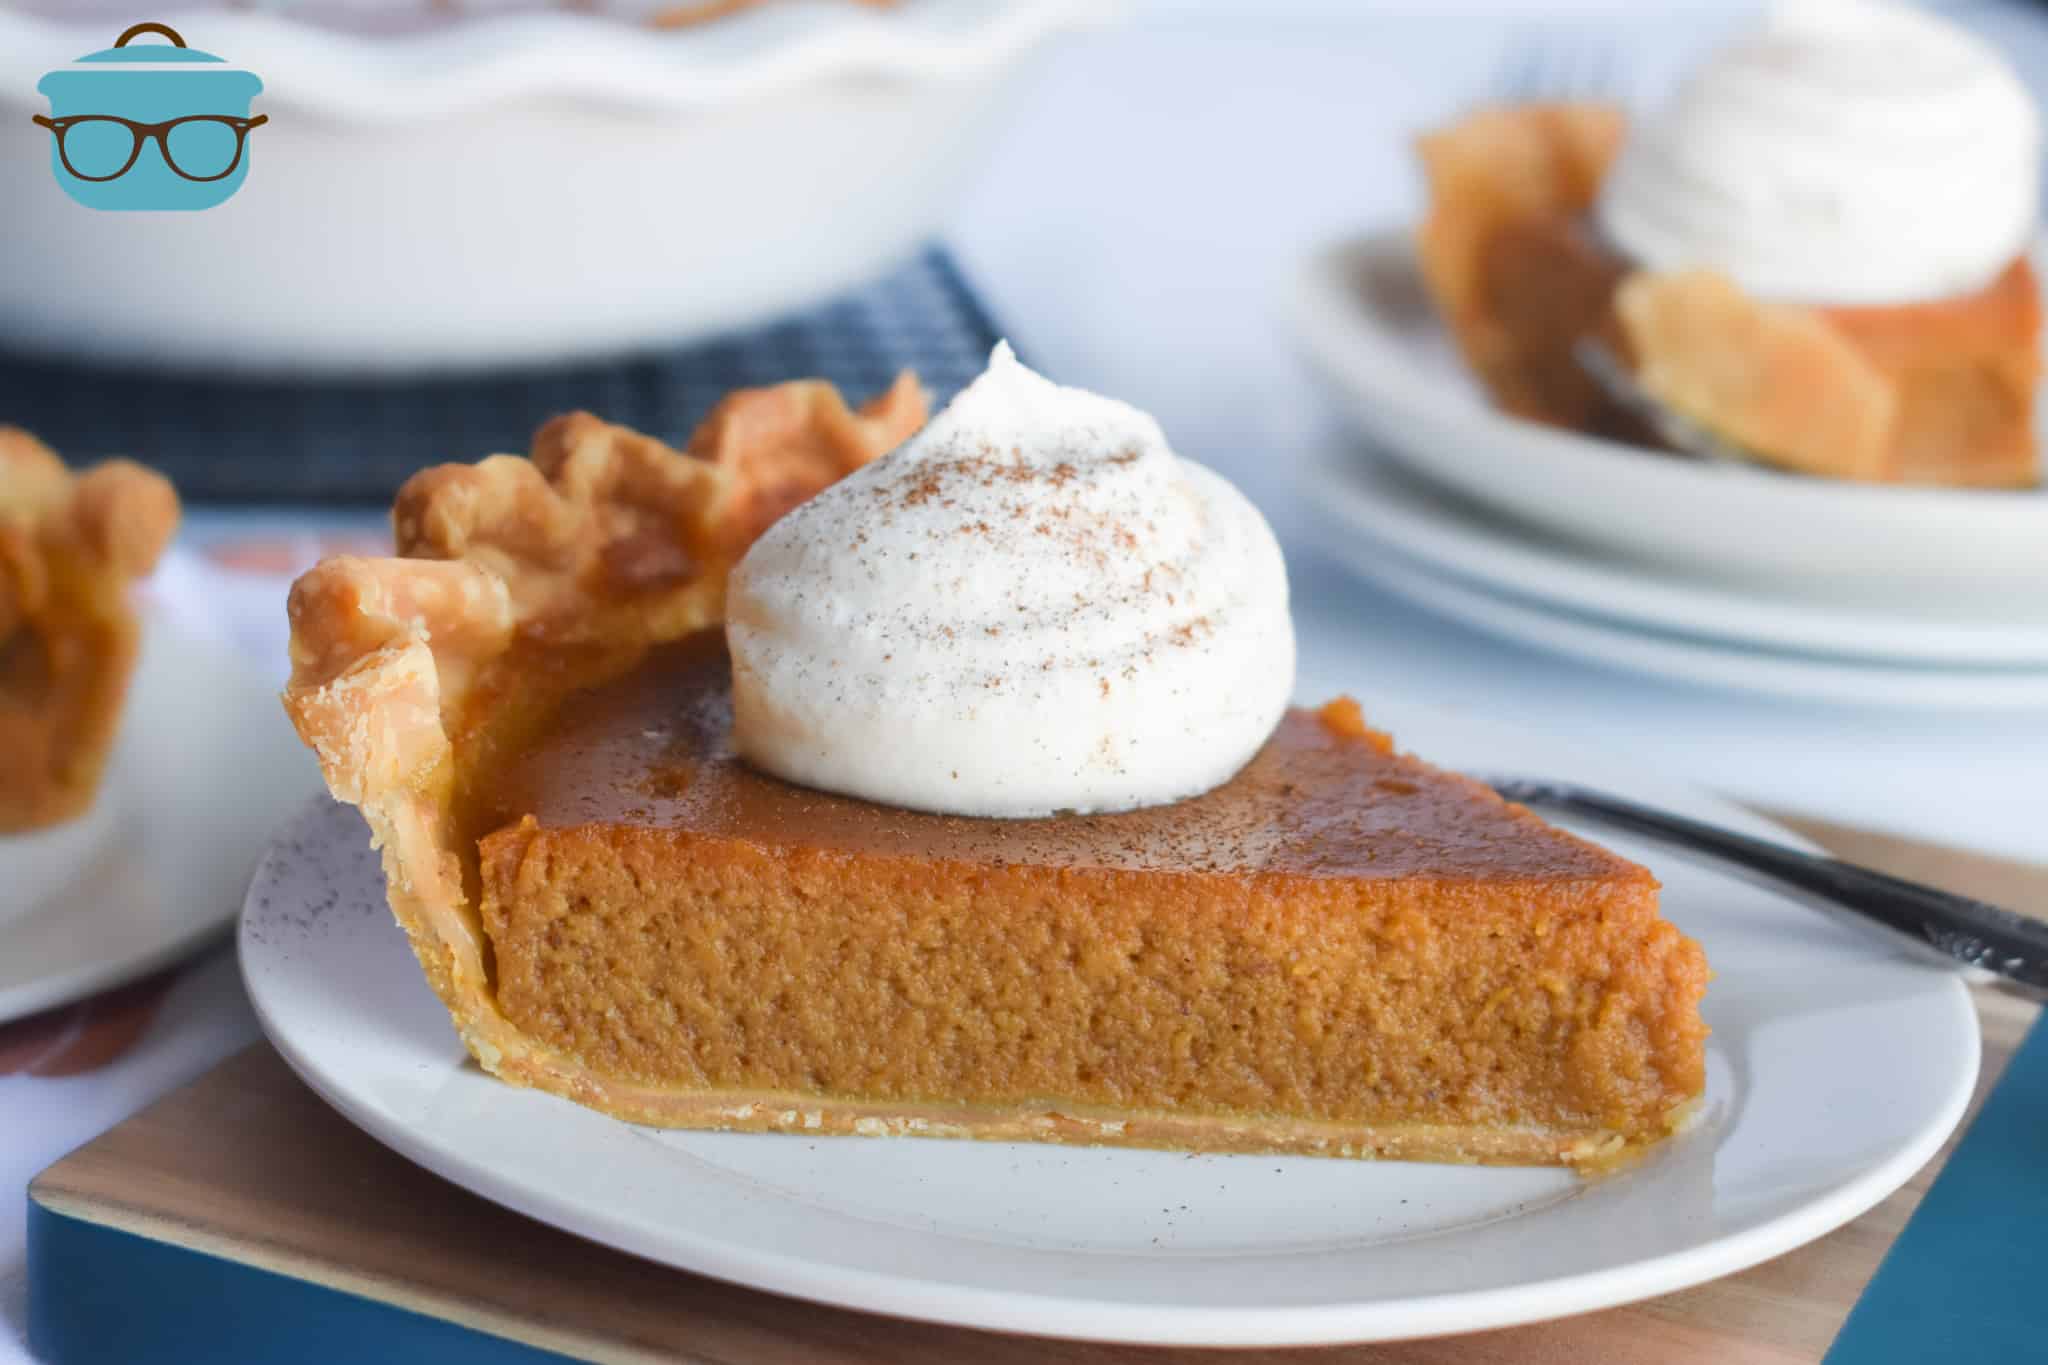 slice of pumpkin pie on a small white plate, topped with a dollop of whipped cream.